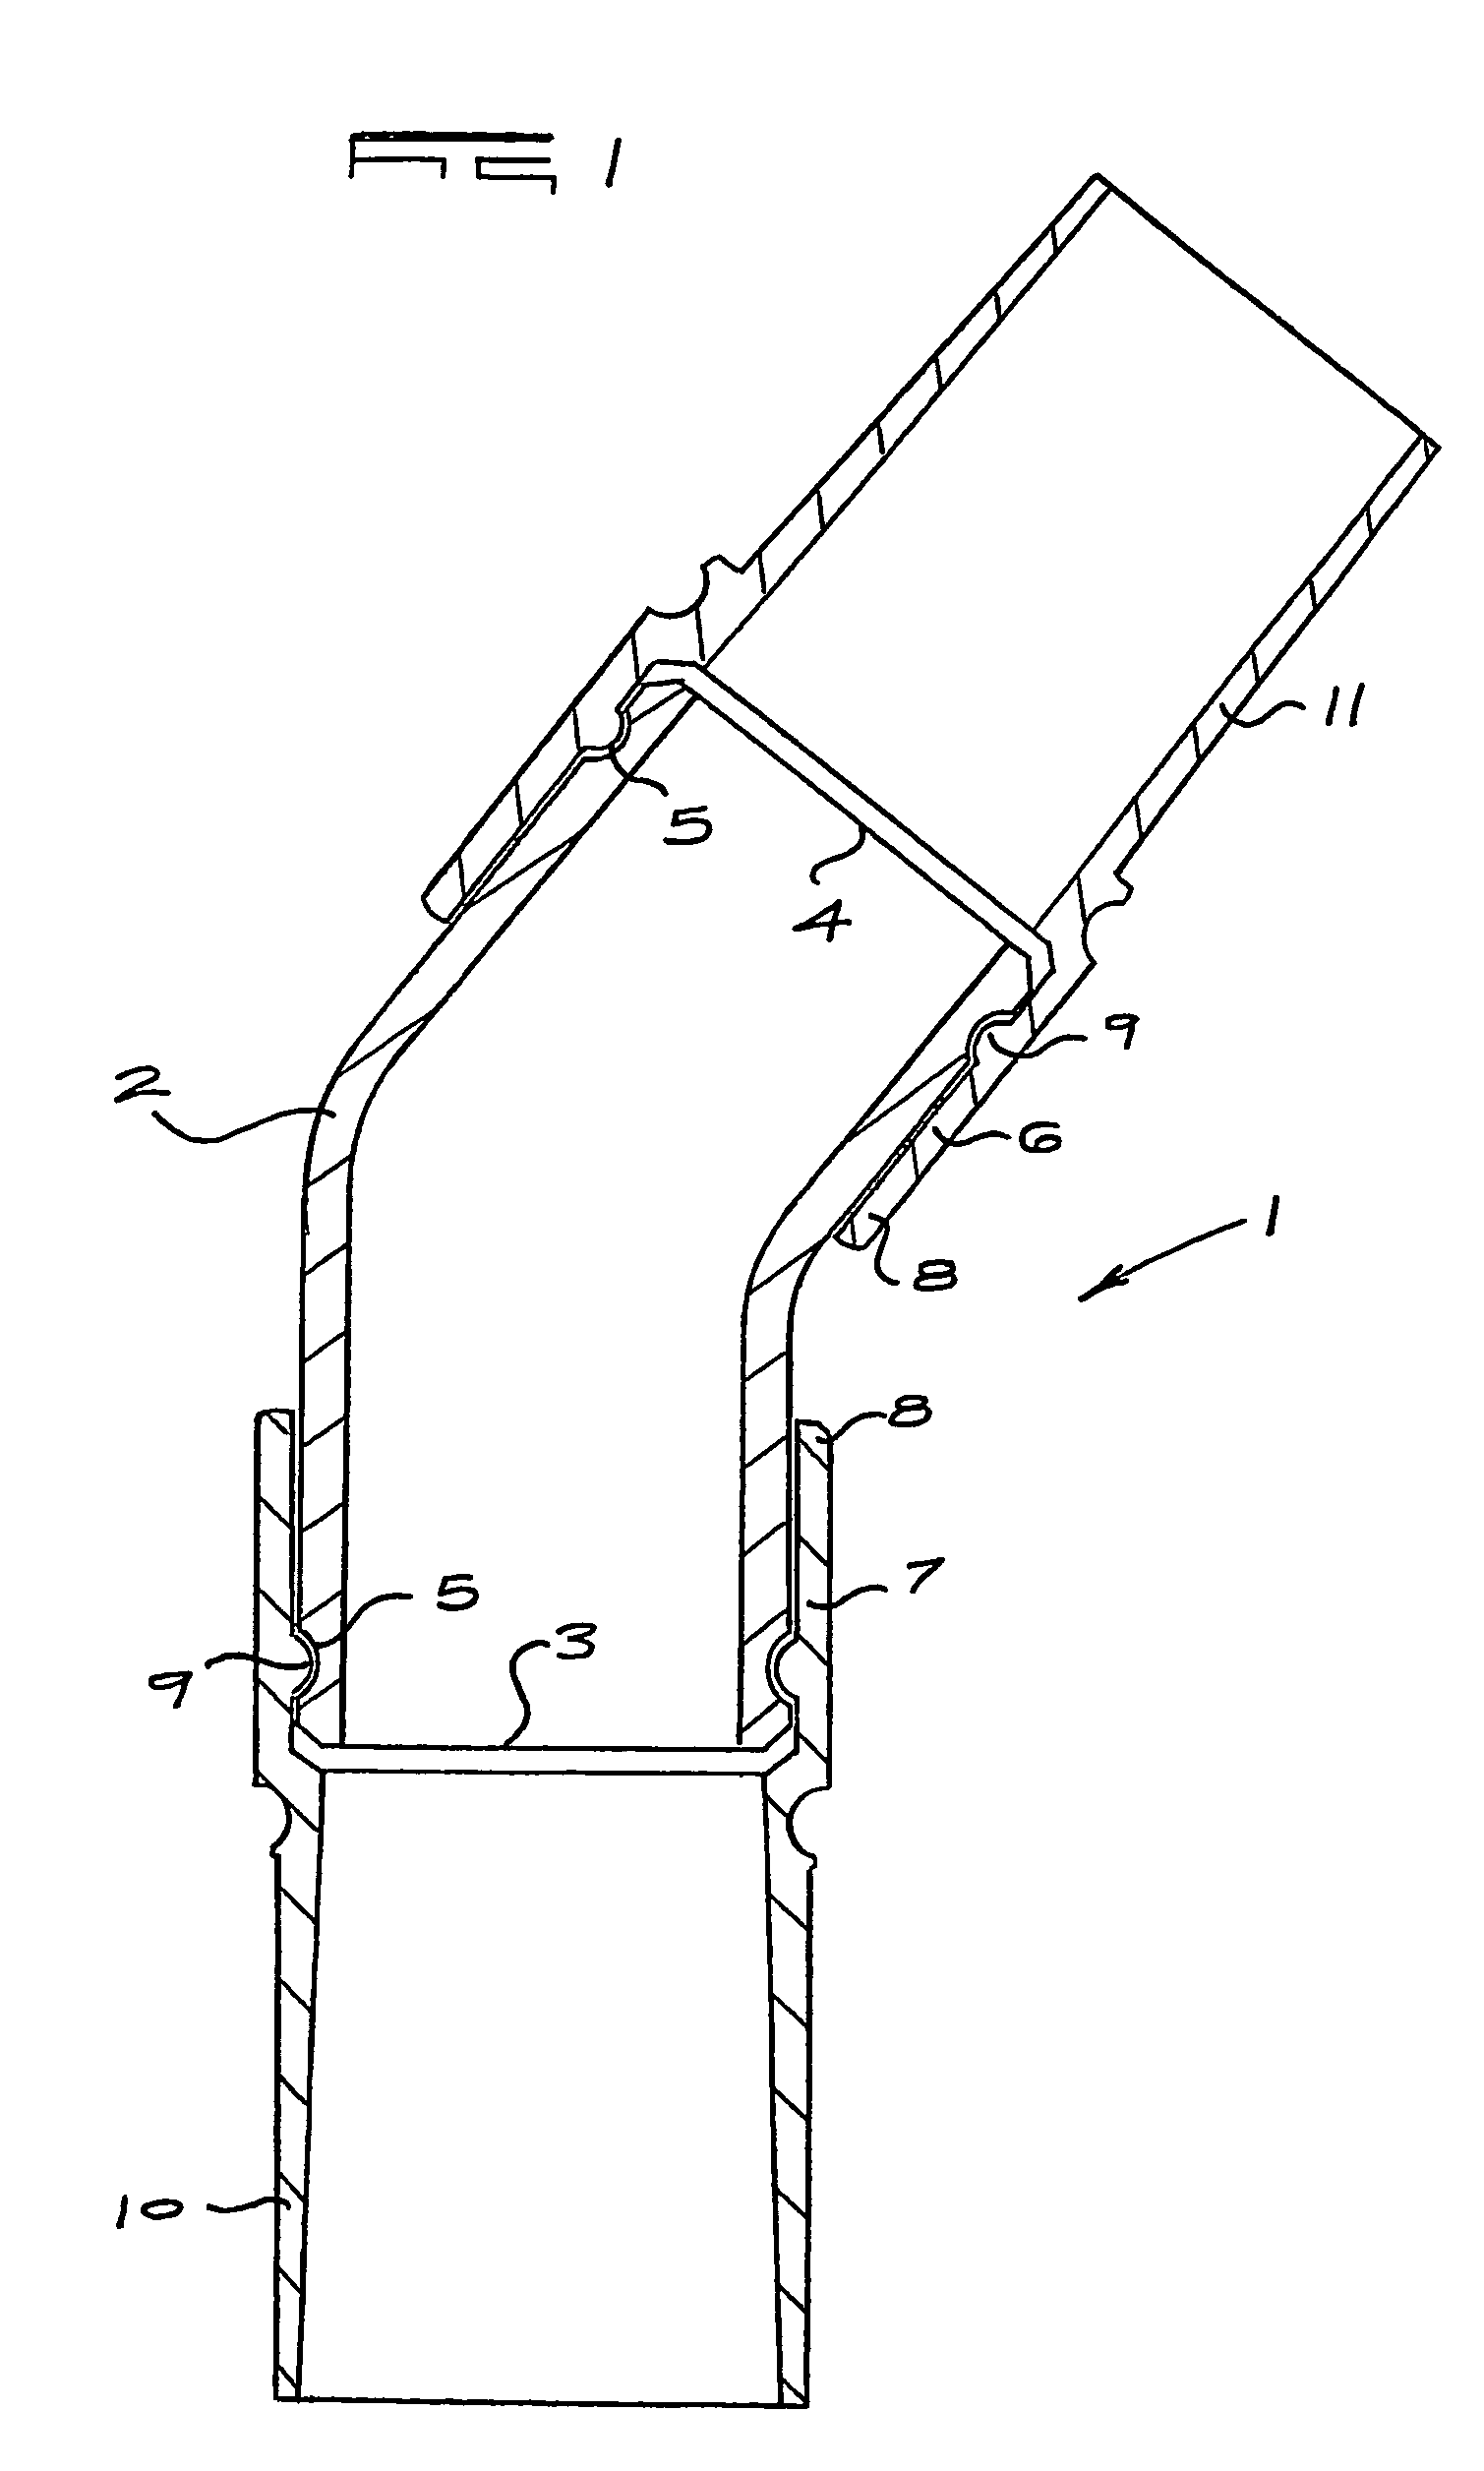 Directional control of an automatic pool cleaner